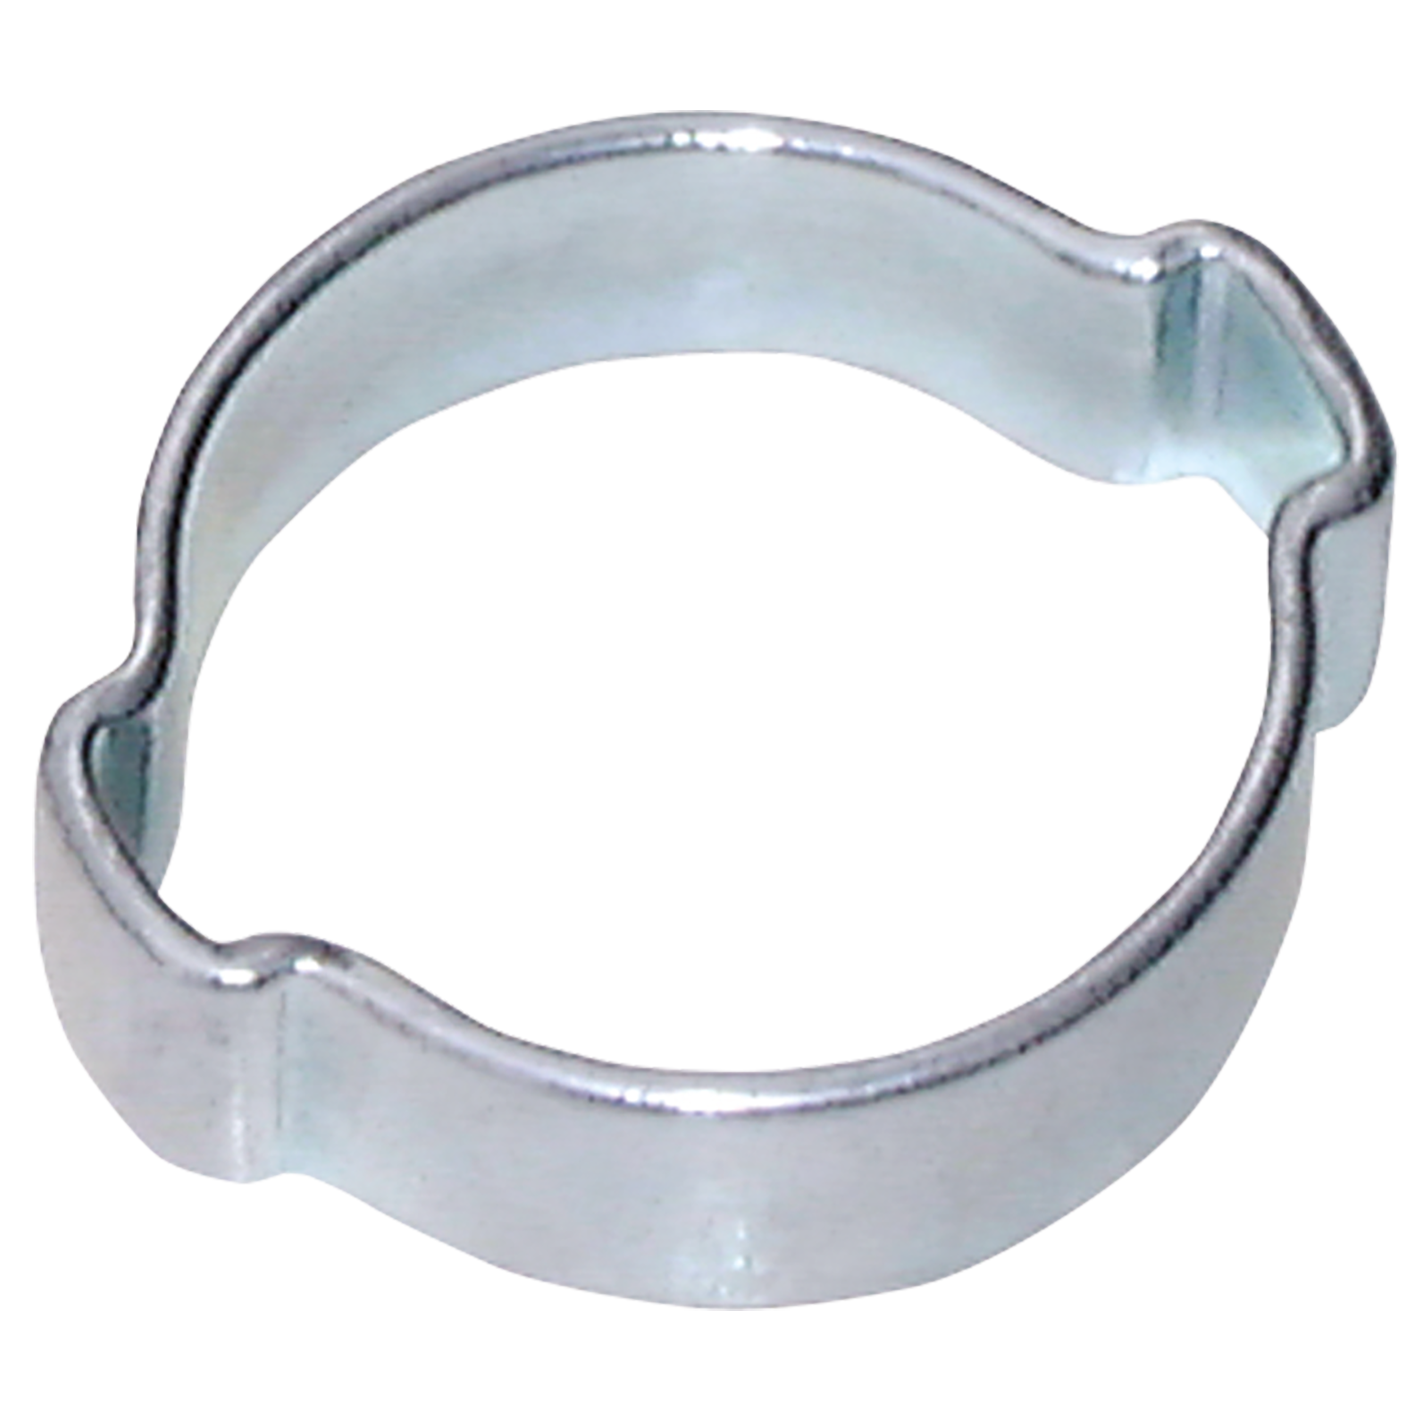 31.0-34.0MM 2-EAR STEEL CLAMP PLATED